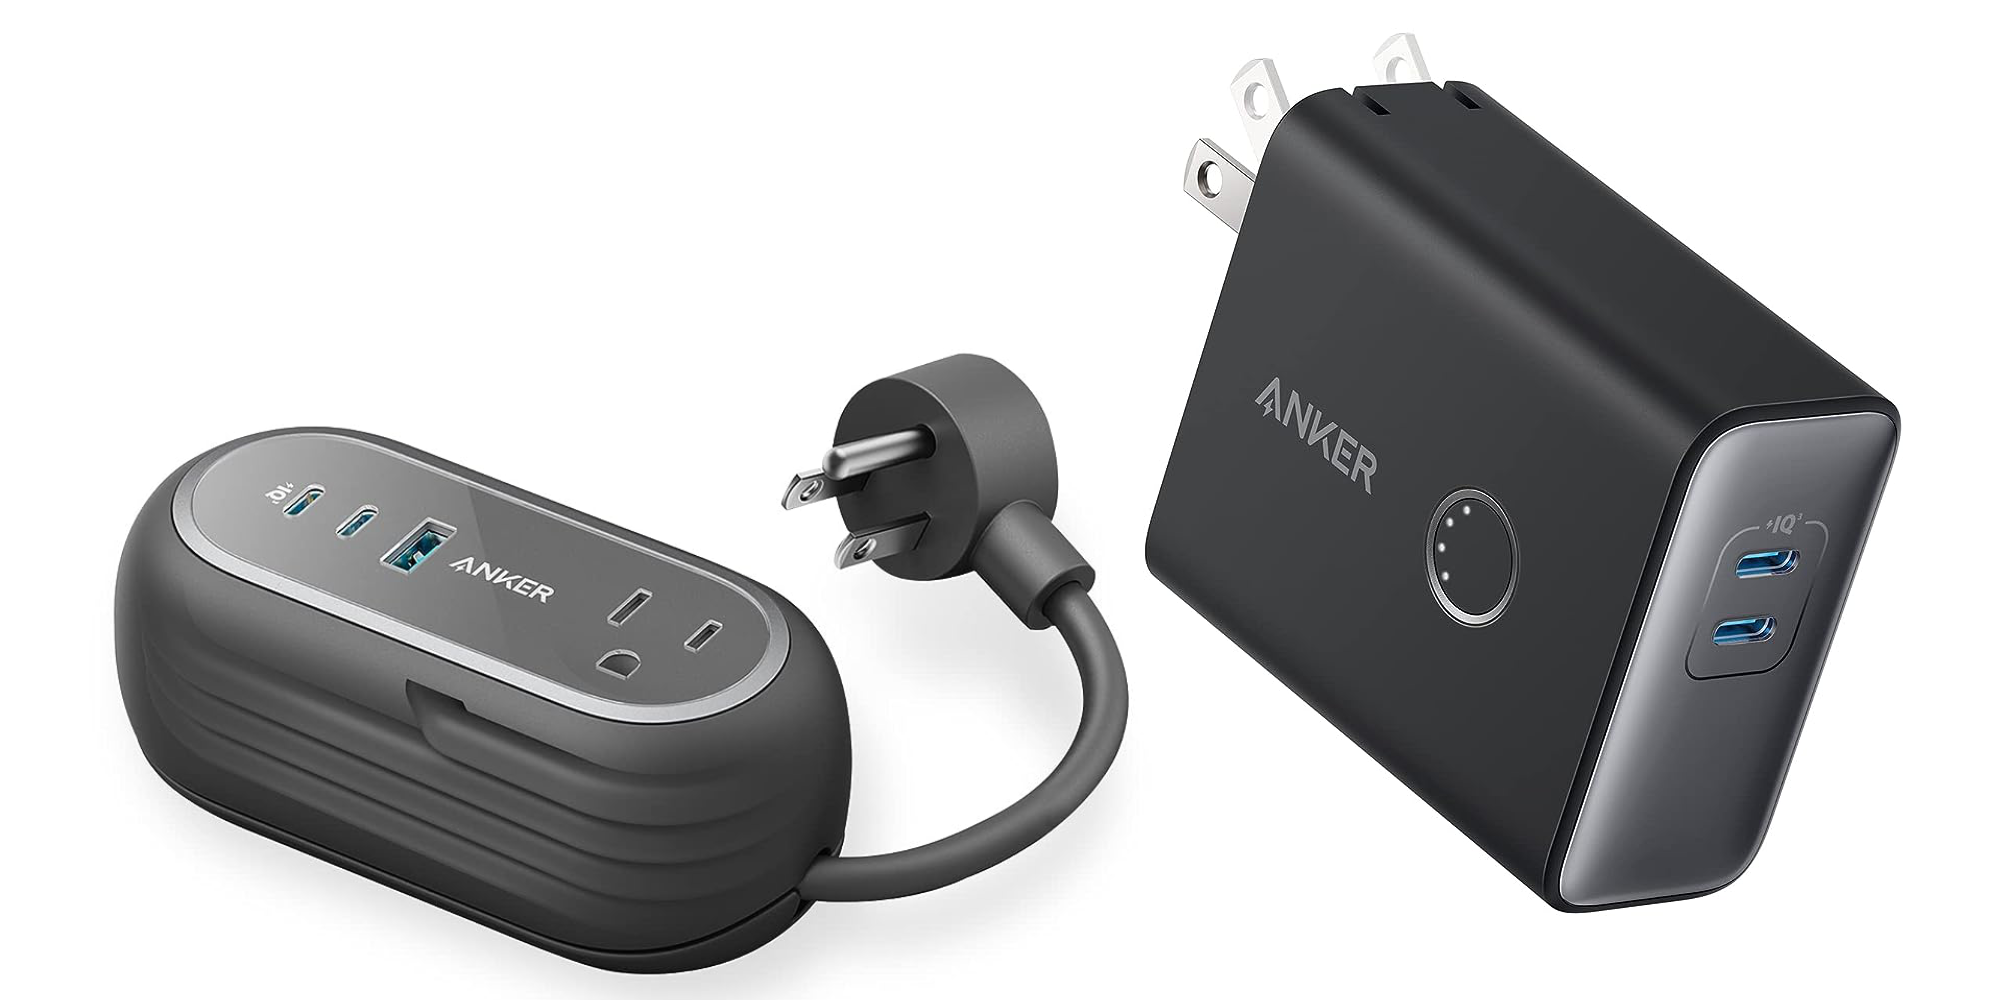 Anker MagSafe iPhone battery packs start at $42 on sale